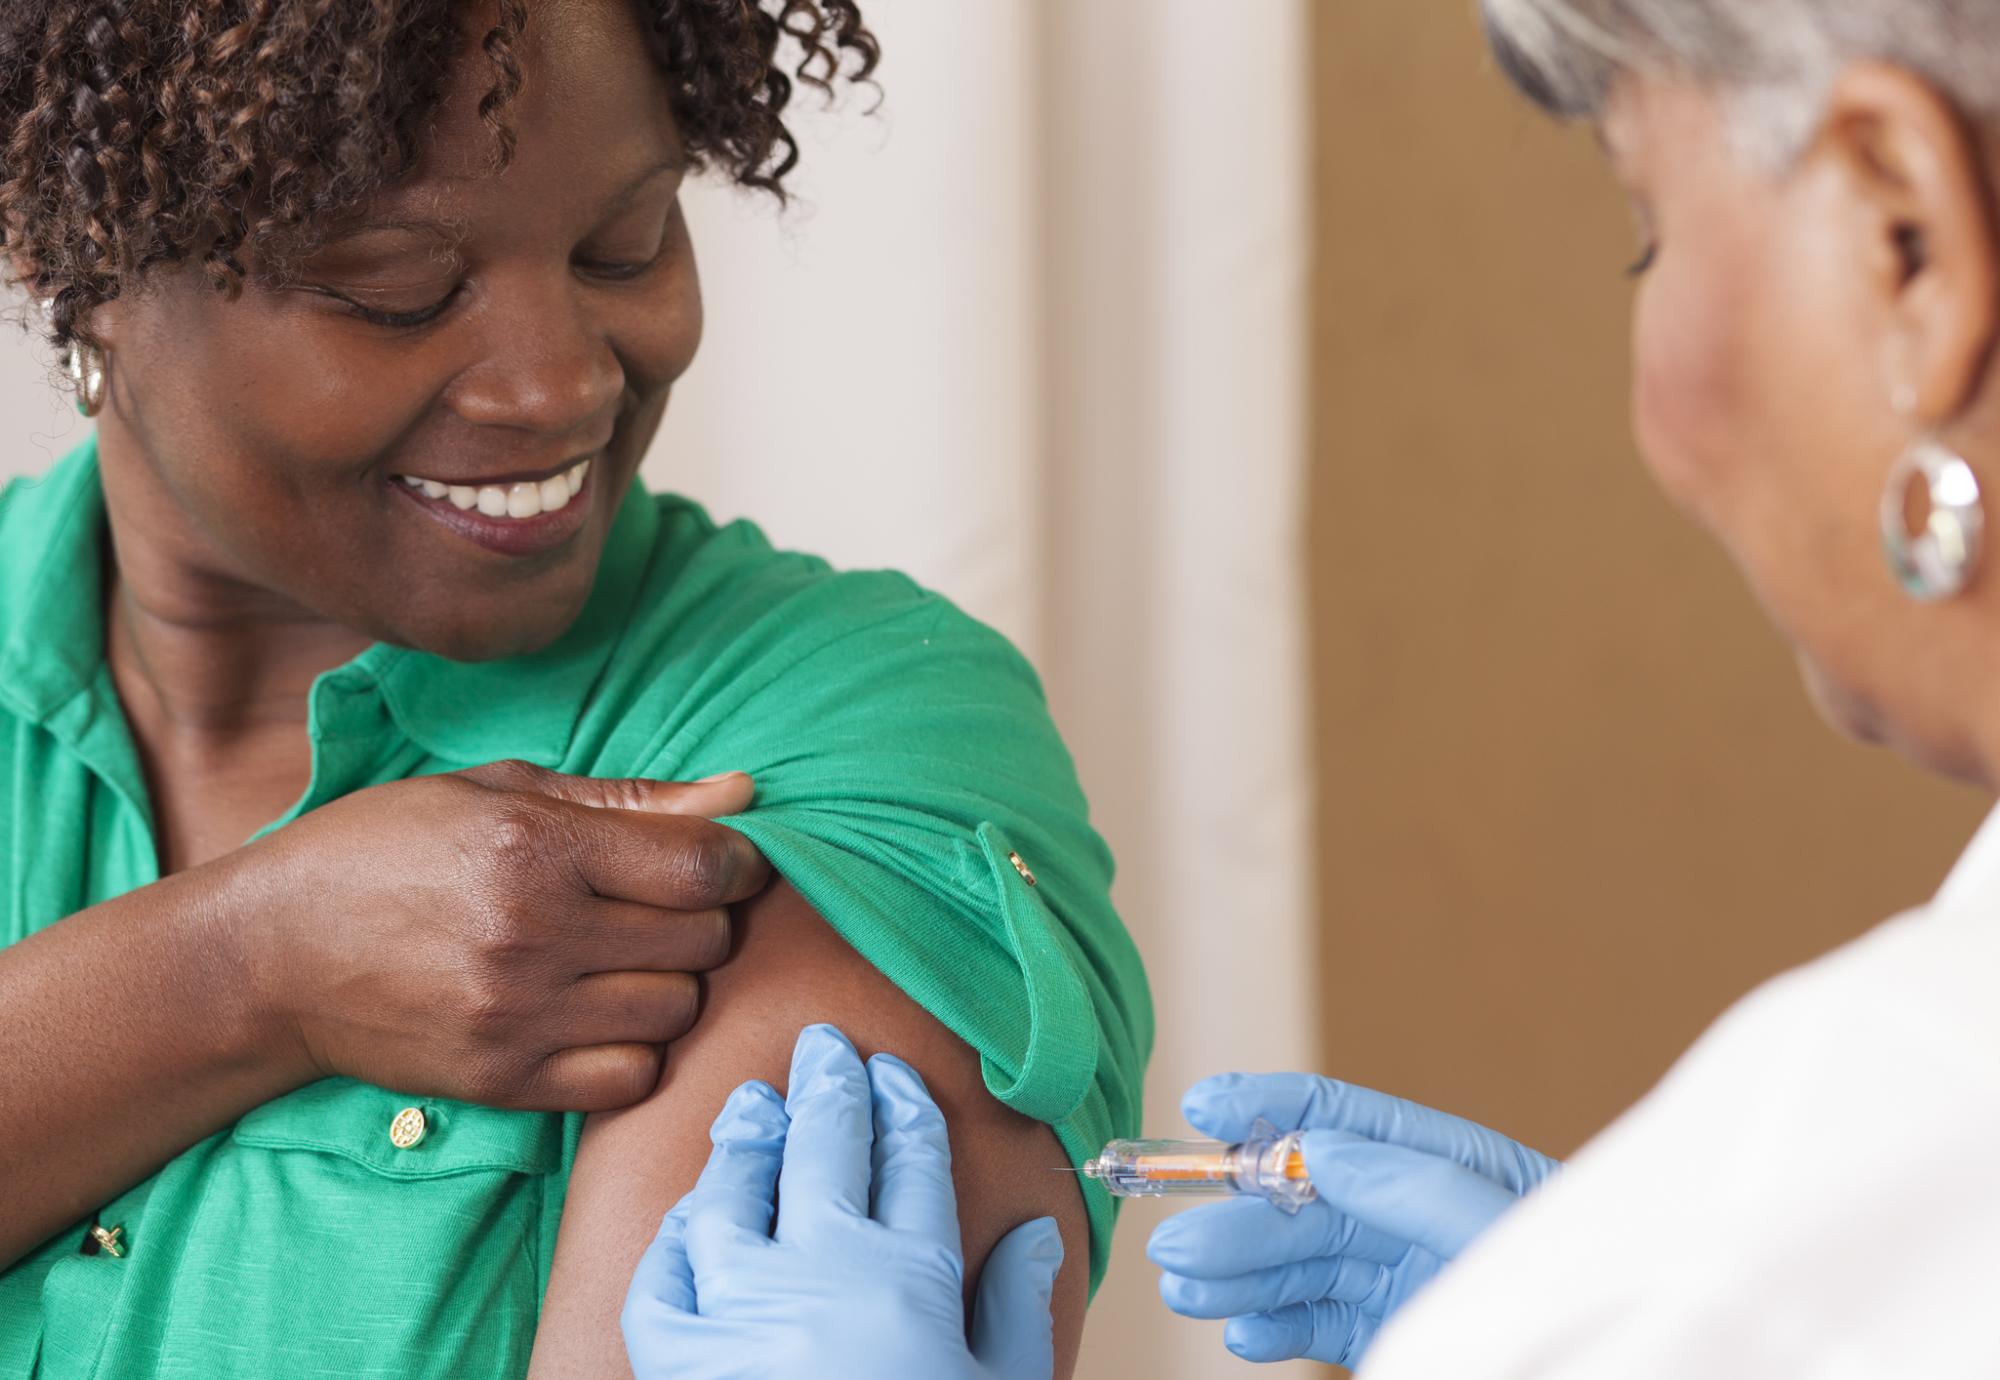 Woman receives a vaccination injection from health professional